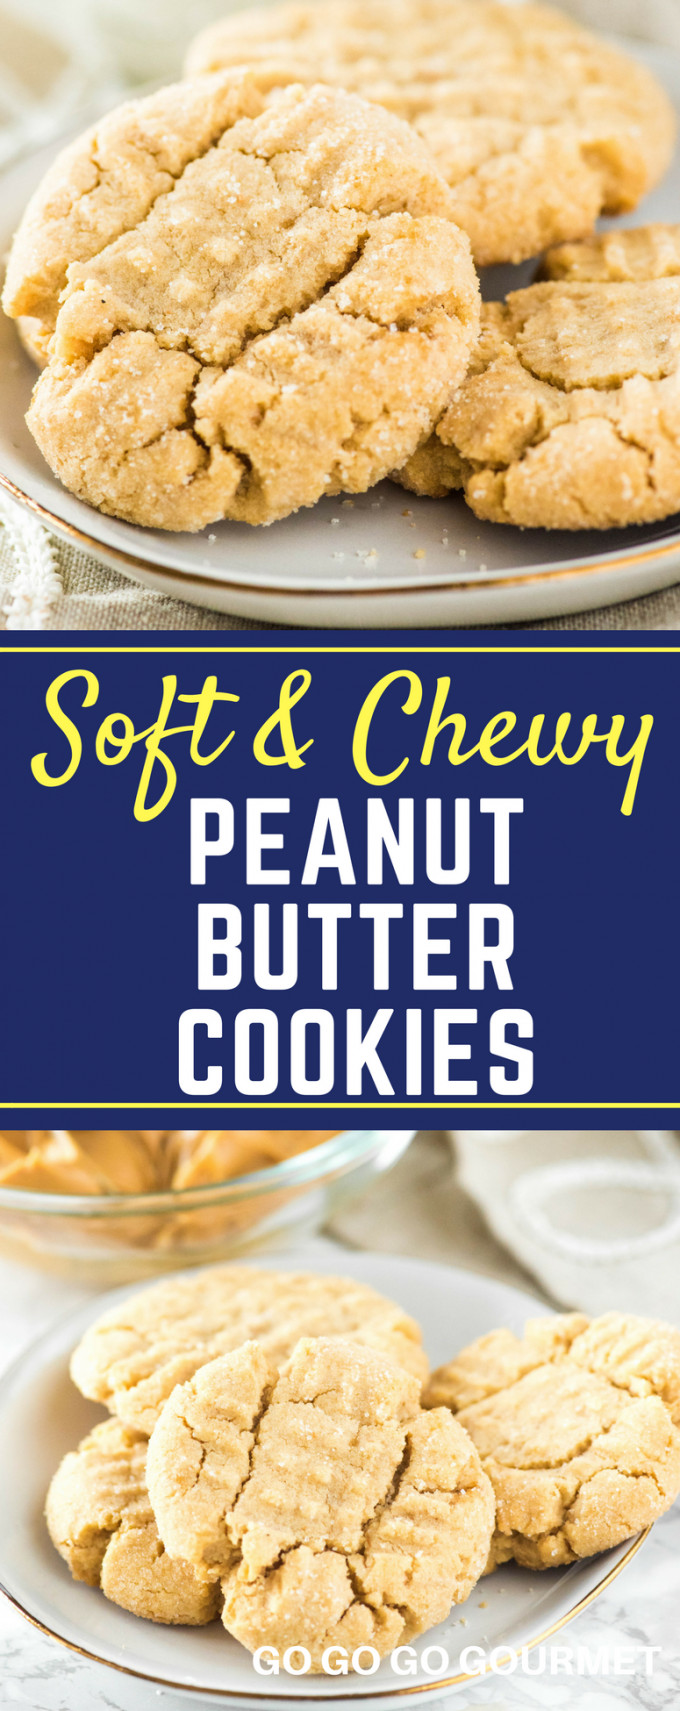 Gourmet Peanut Butter Cookies
 Easy Soft and Chewy Peanut Butter Cookies Go Go Go Gourmet